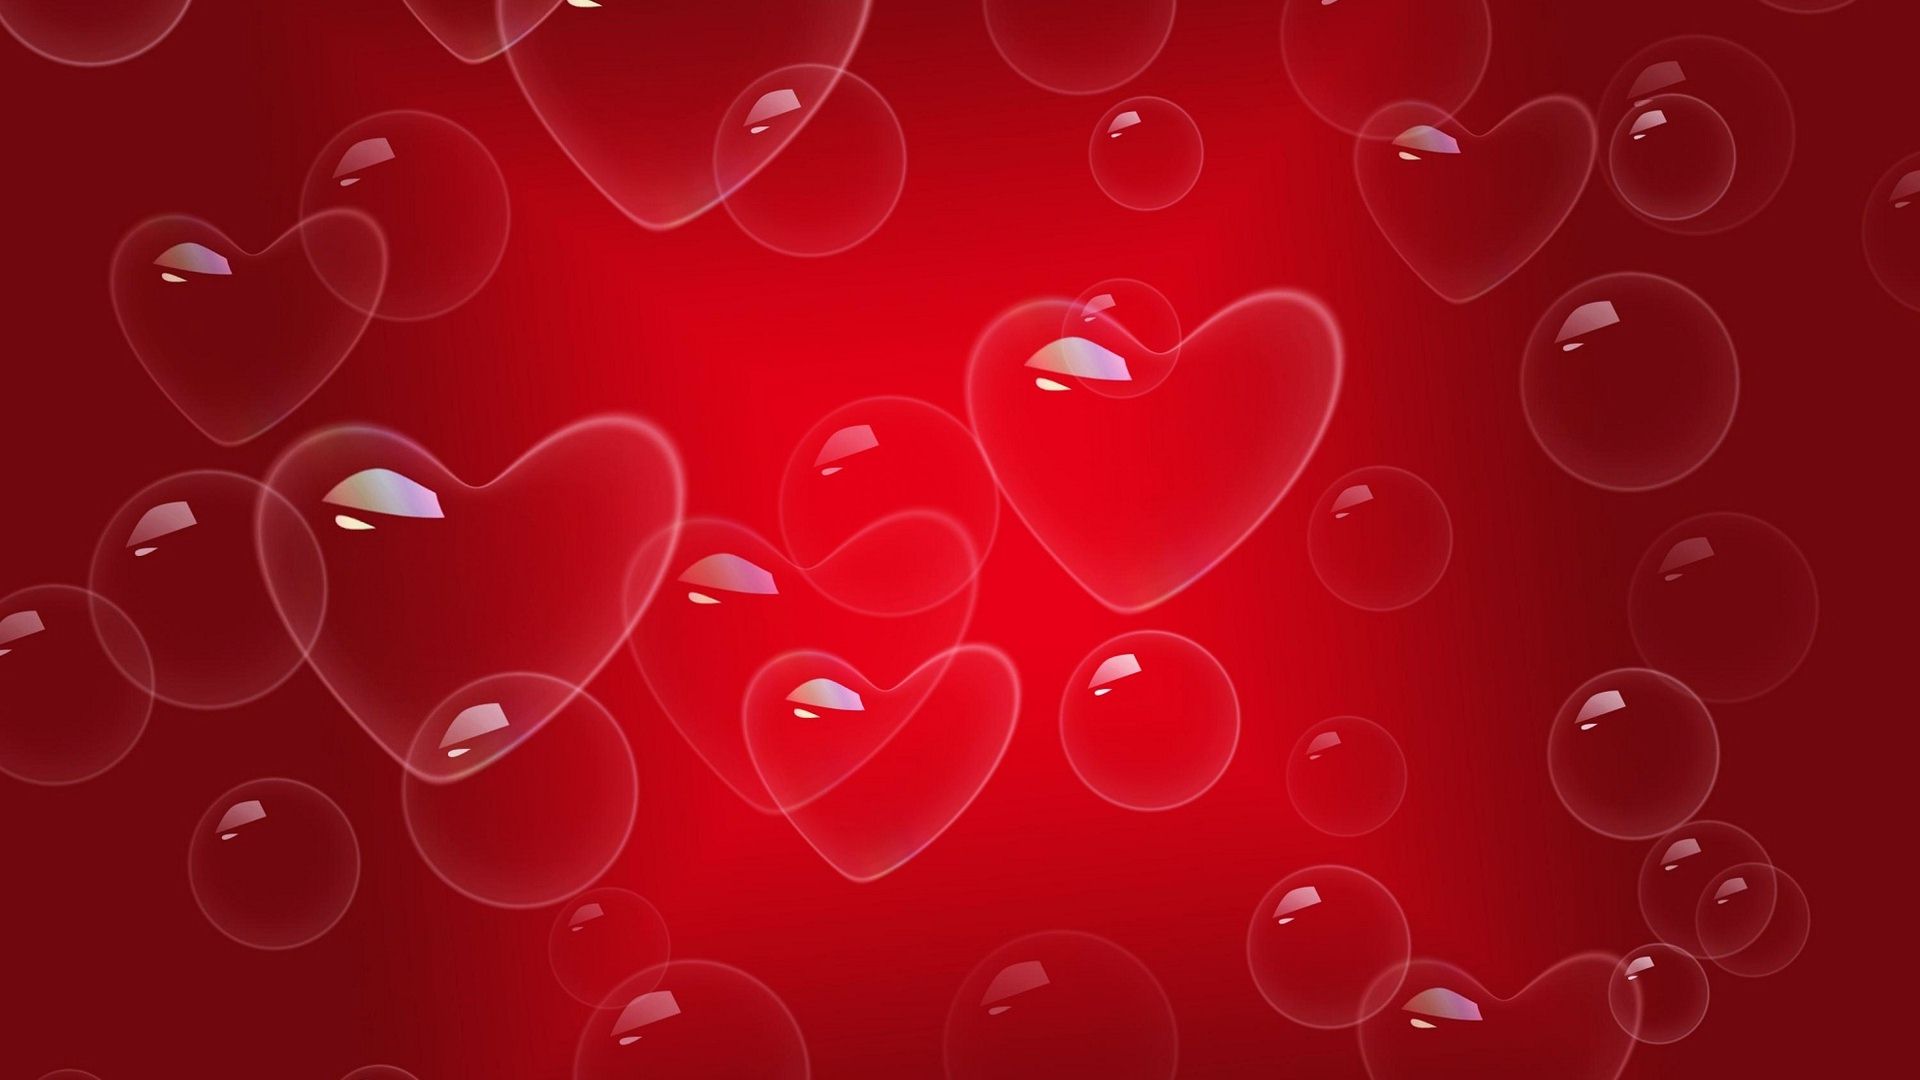 Red Love Heart Background